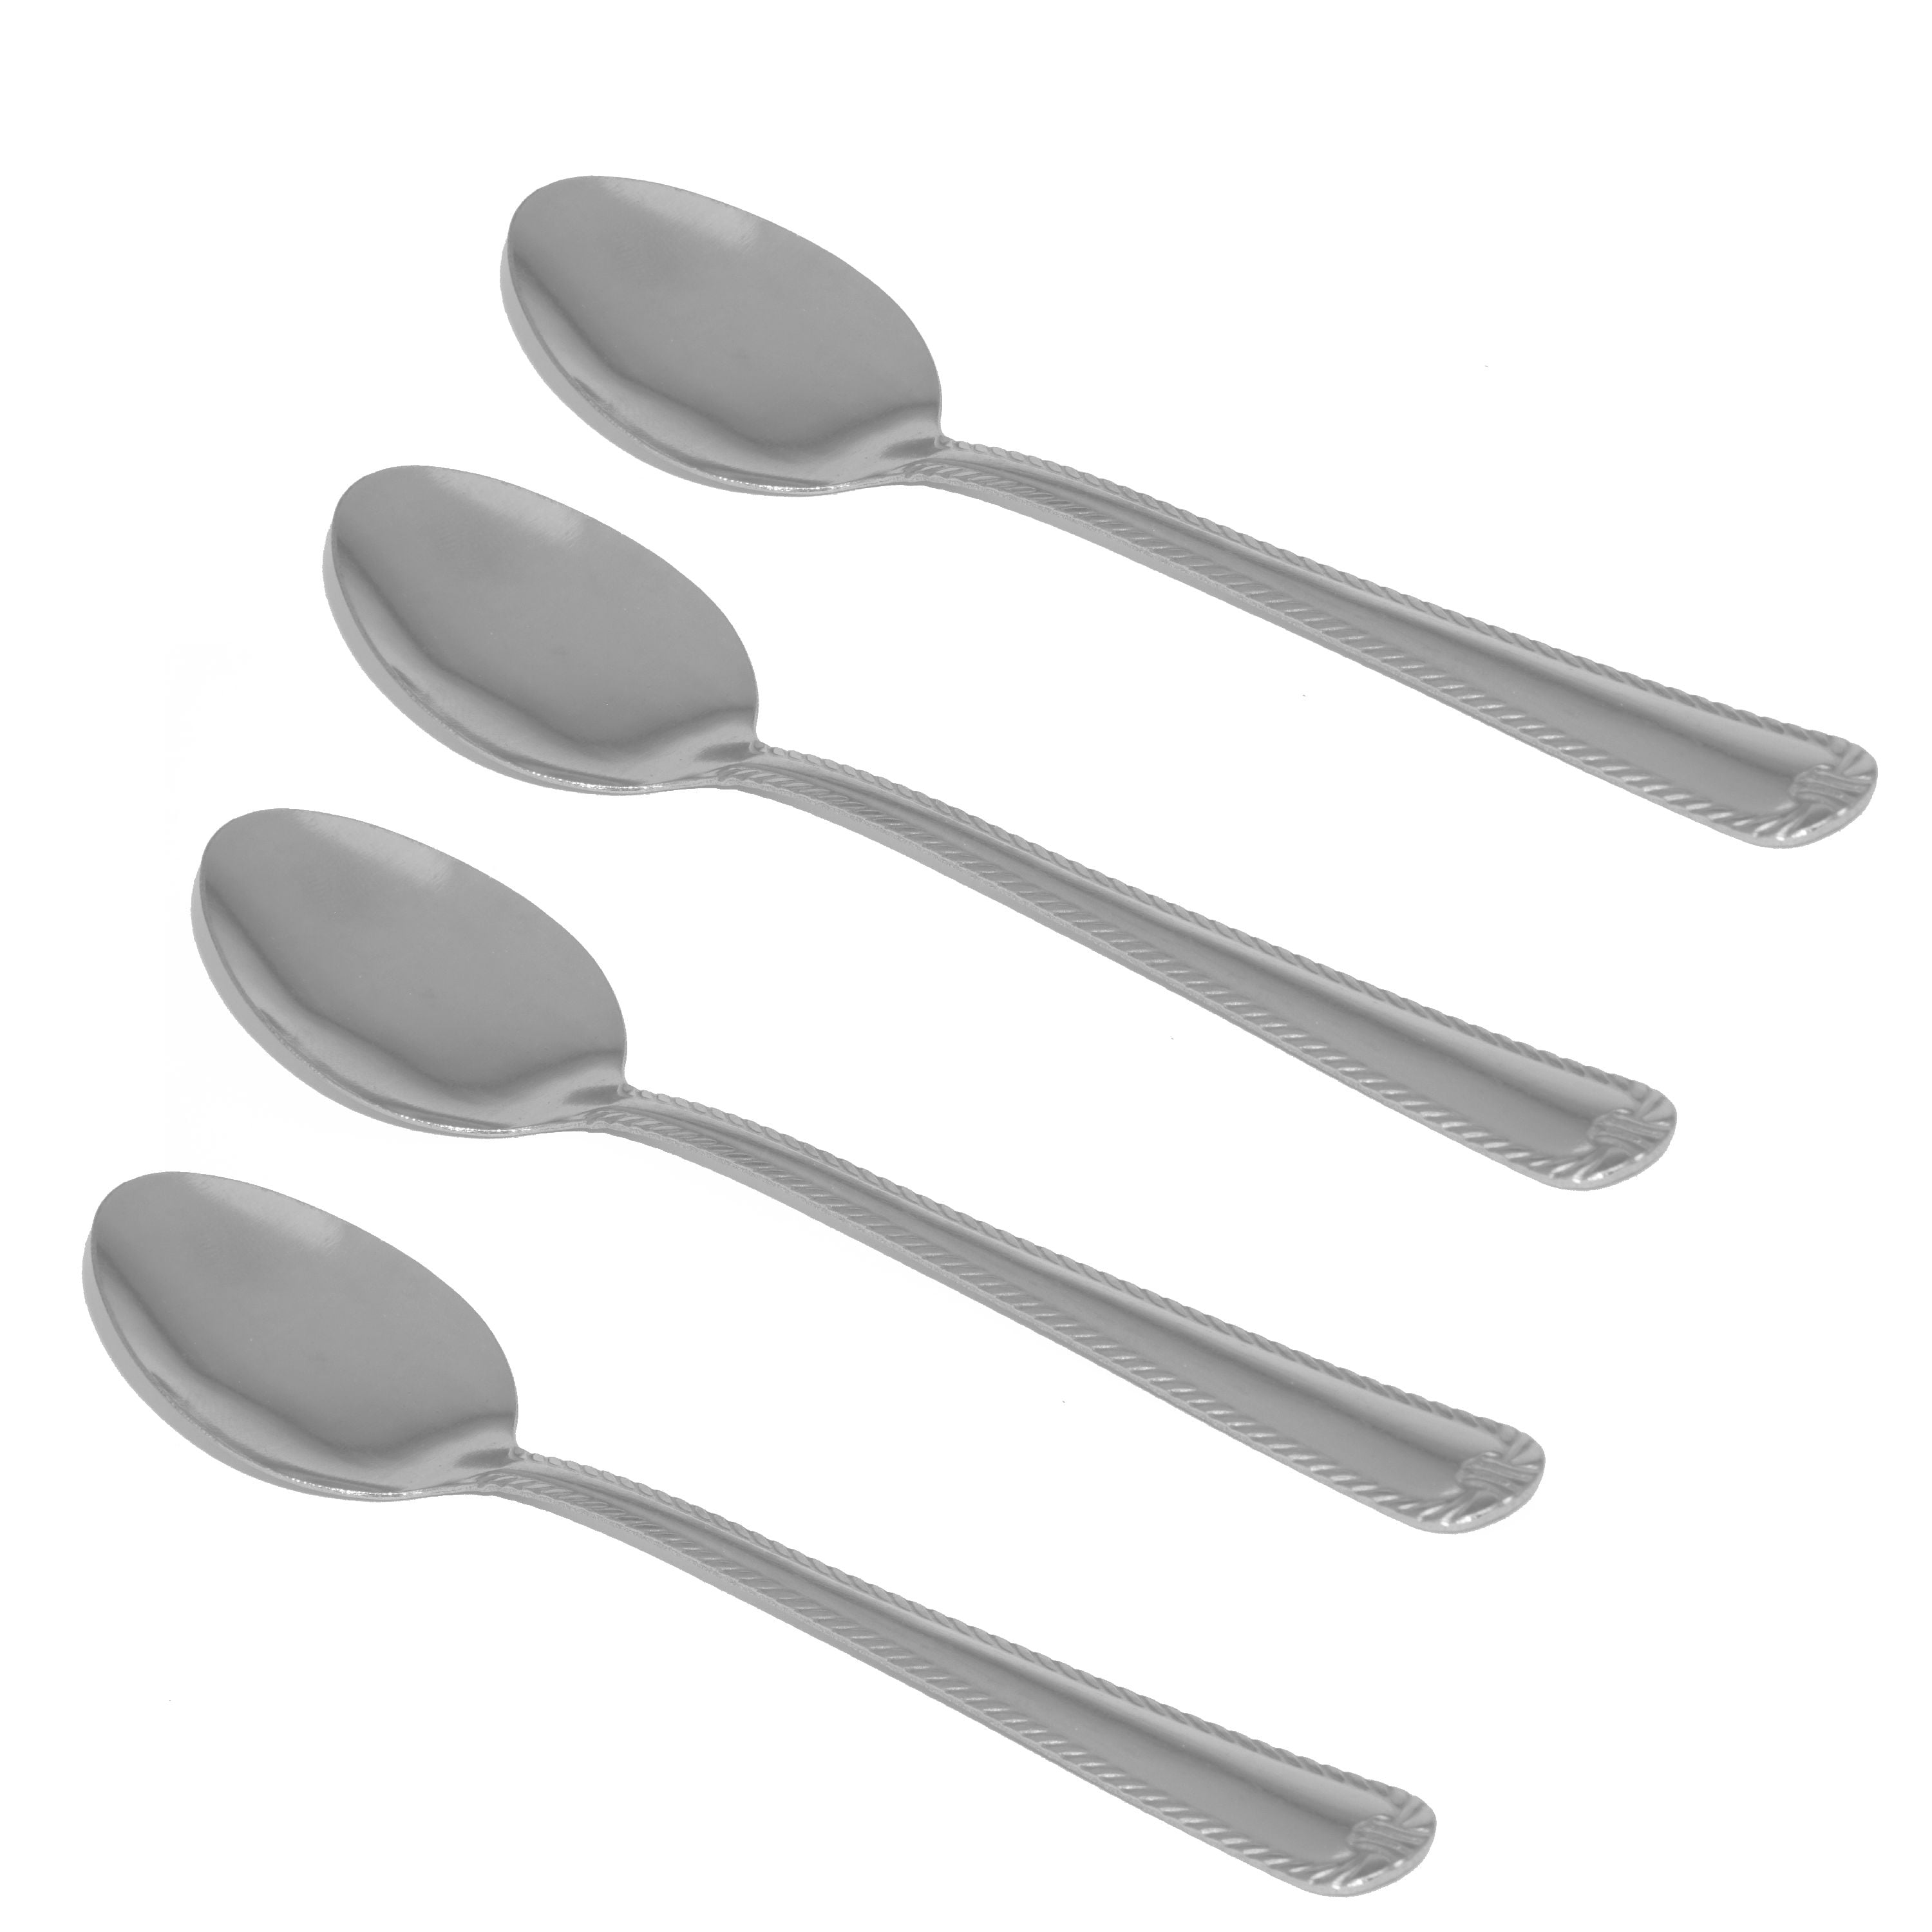 Mainstays Lace 4 Piece Stainless Steel Dinner Spoon Set